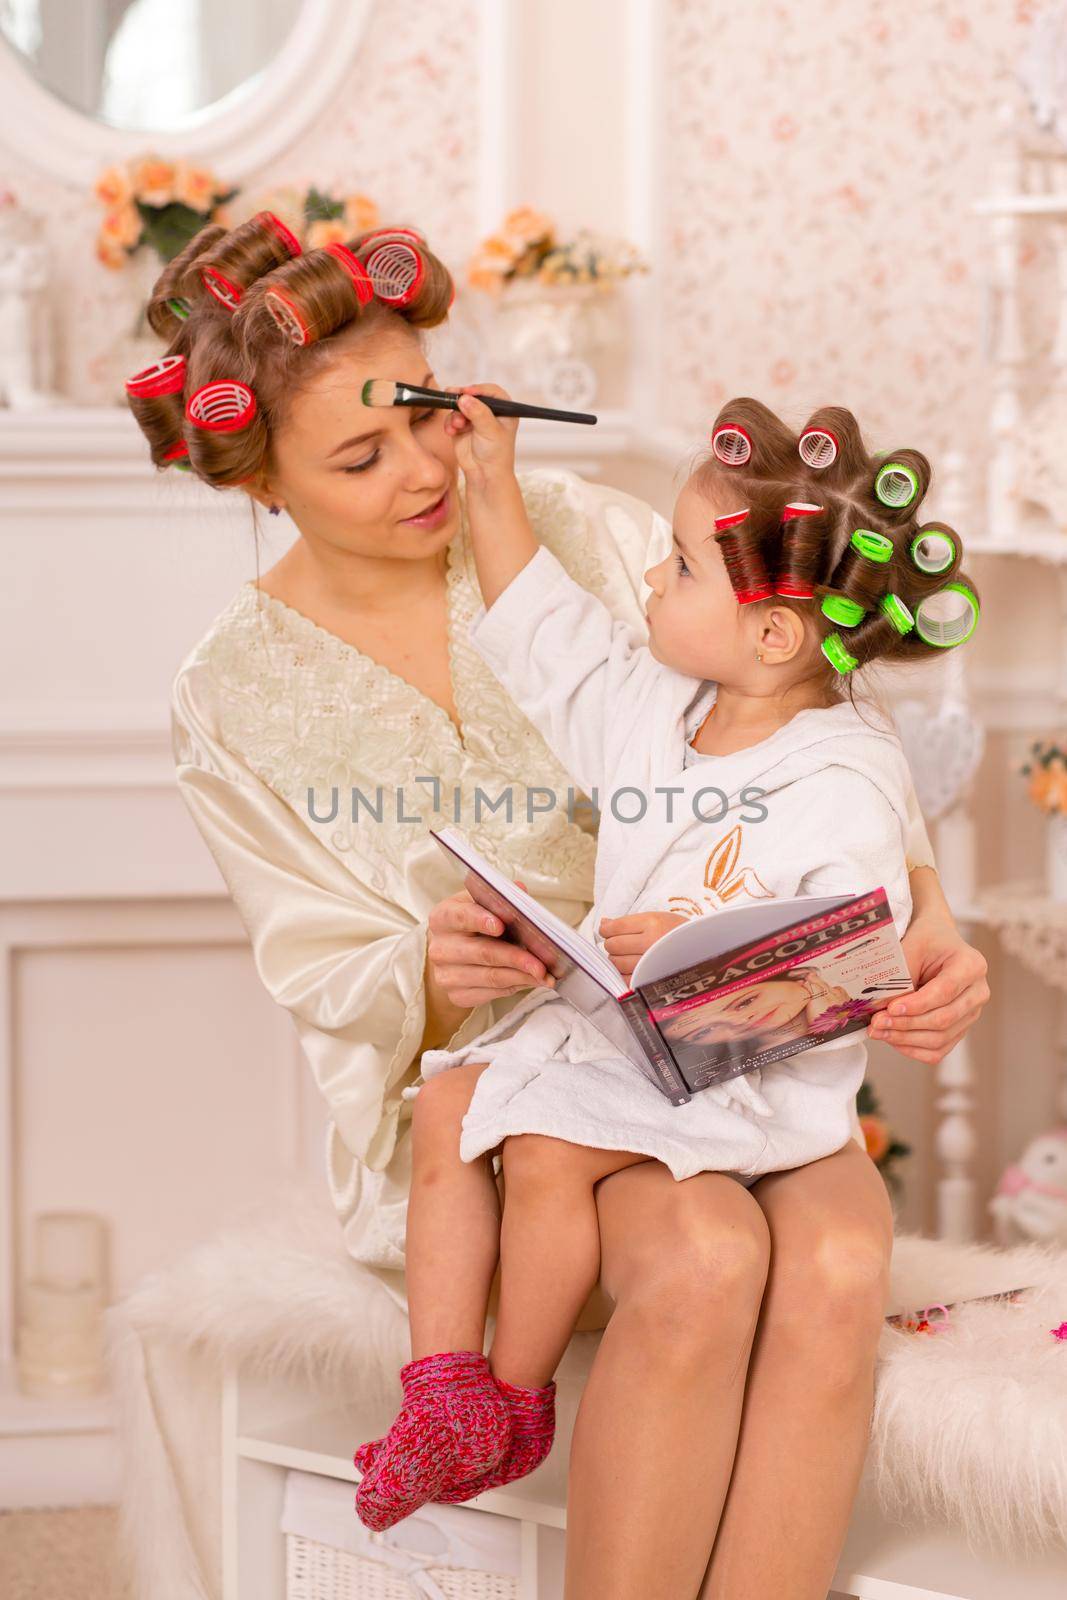 Adorable little girl with her mother in hair curlers apply makeup. Mom teaches daughter to use cosmetics. Beauty day. Girls are such girls.